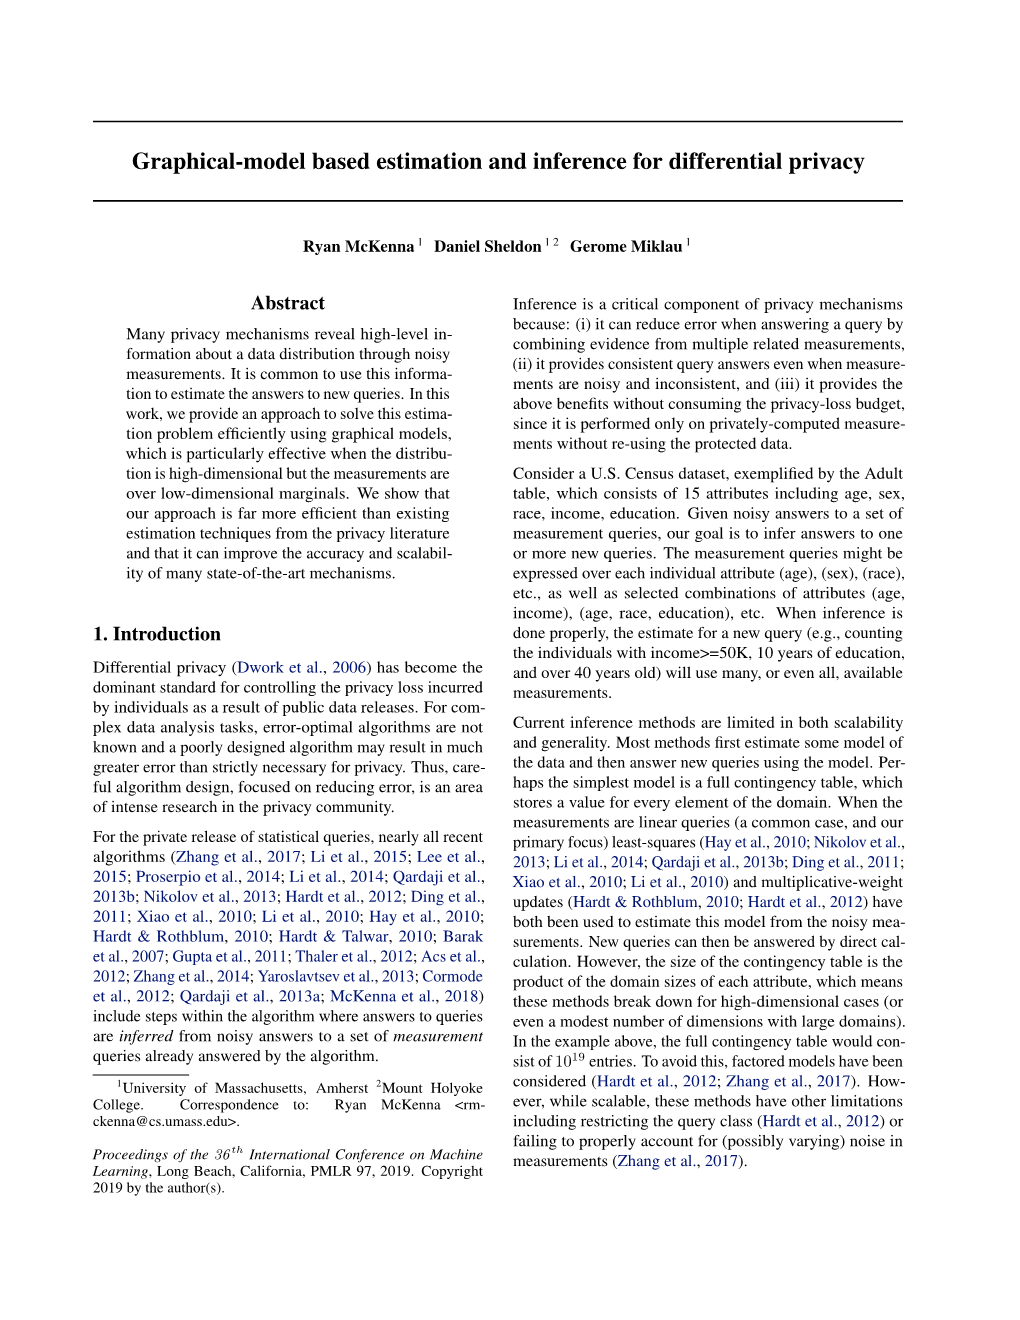 Graphical-Model Based Estimation and Inference for Differential Privacy